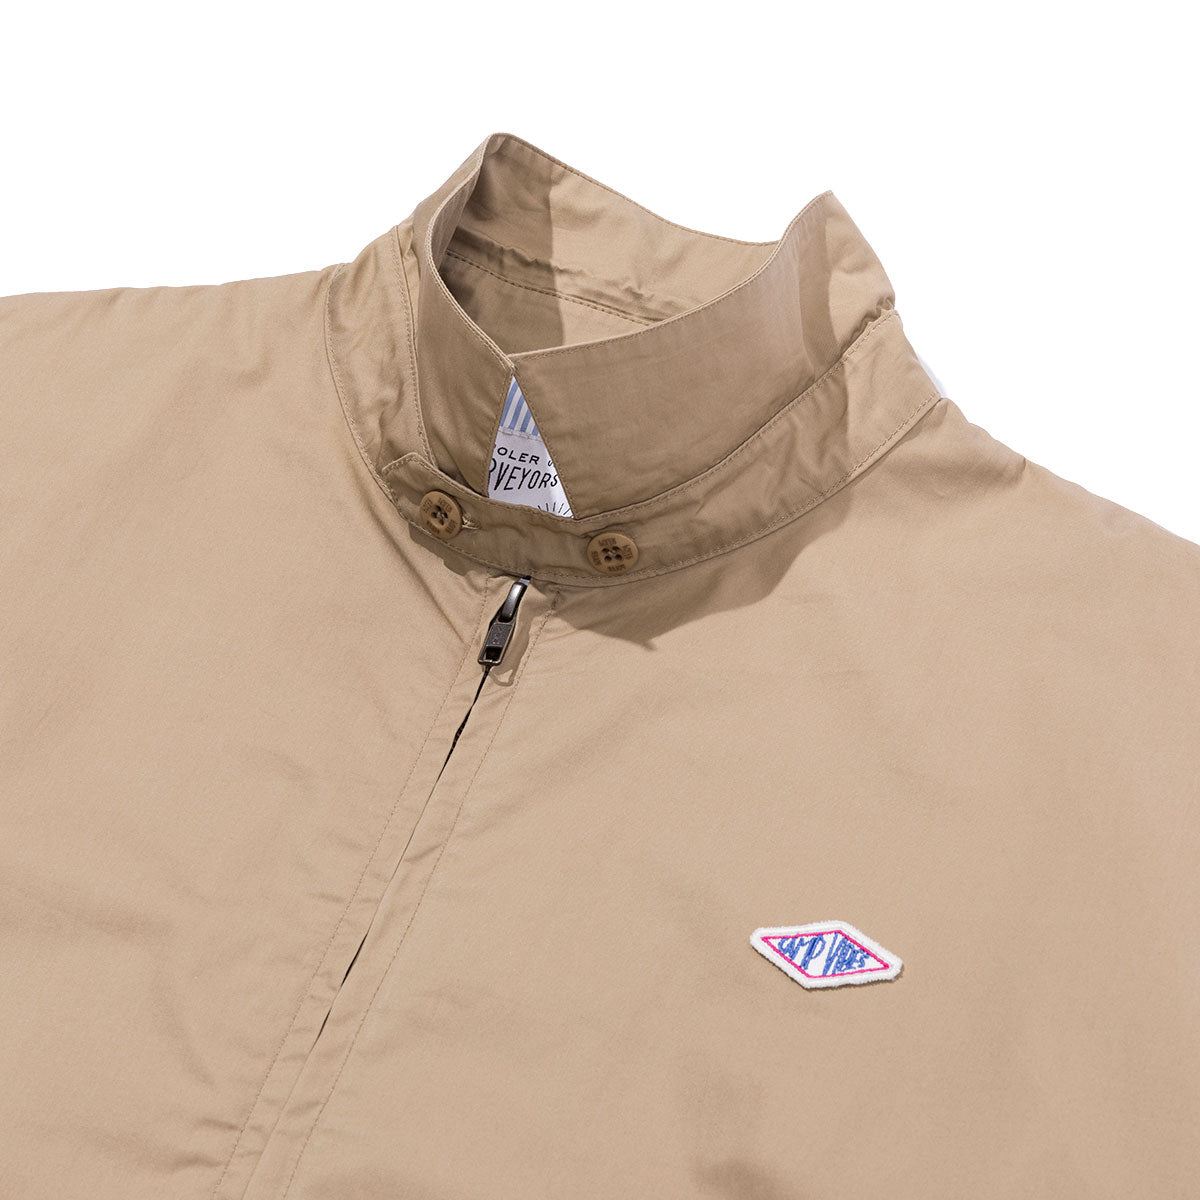 CAMP VIBES DRIZZLER JACKET